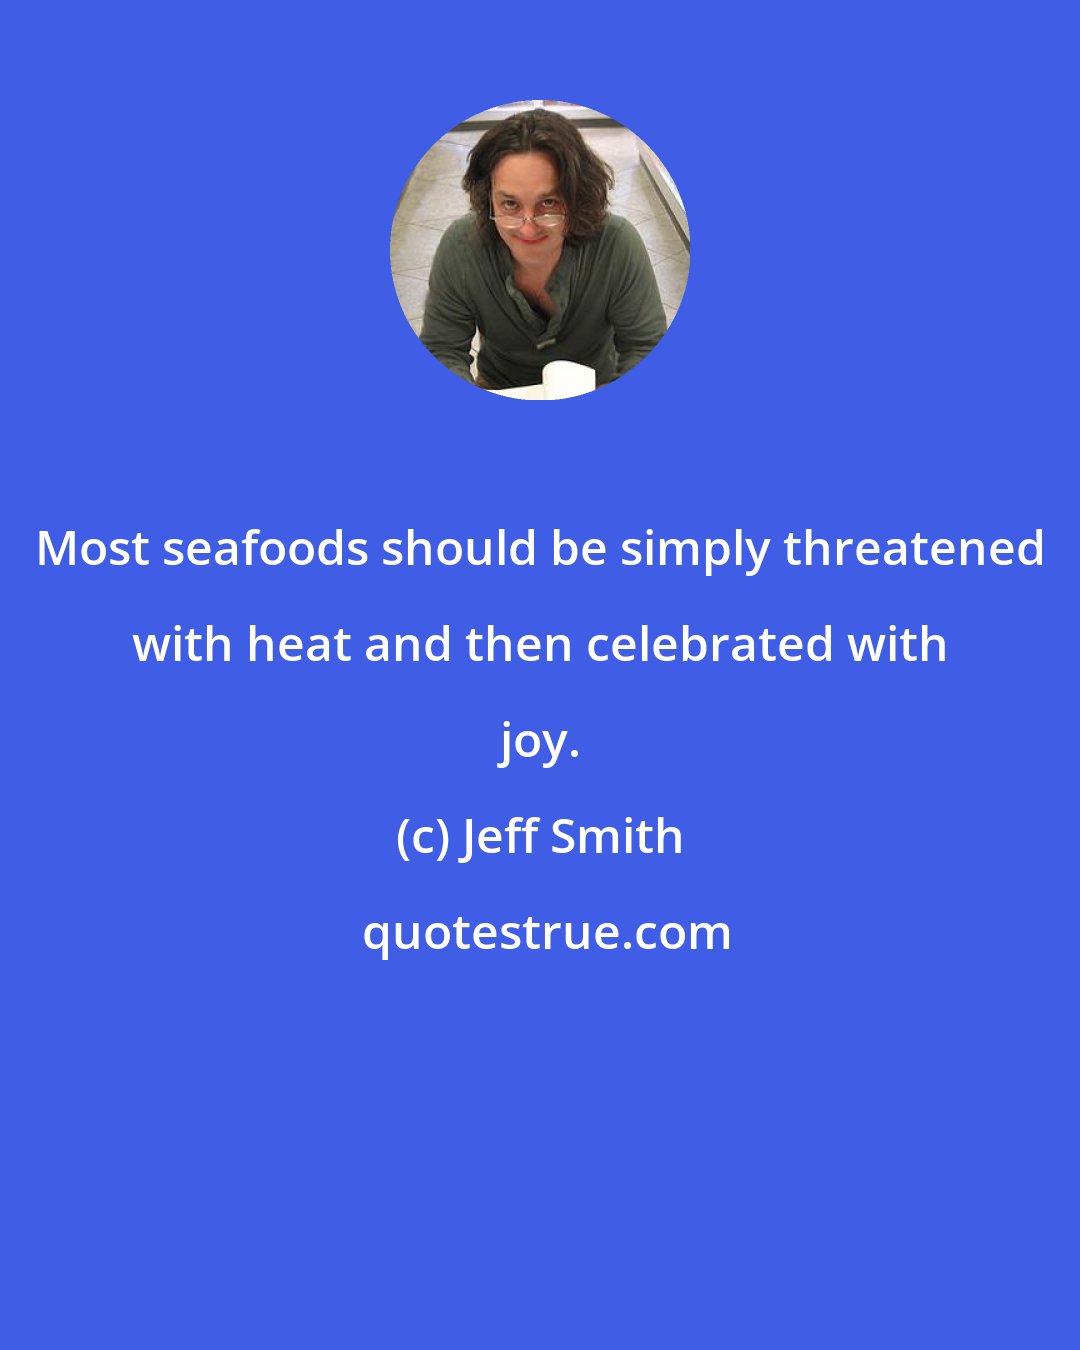 Jeff Smith: Most seafoods should be simply threatened with heat and then celebrated with joy.